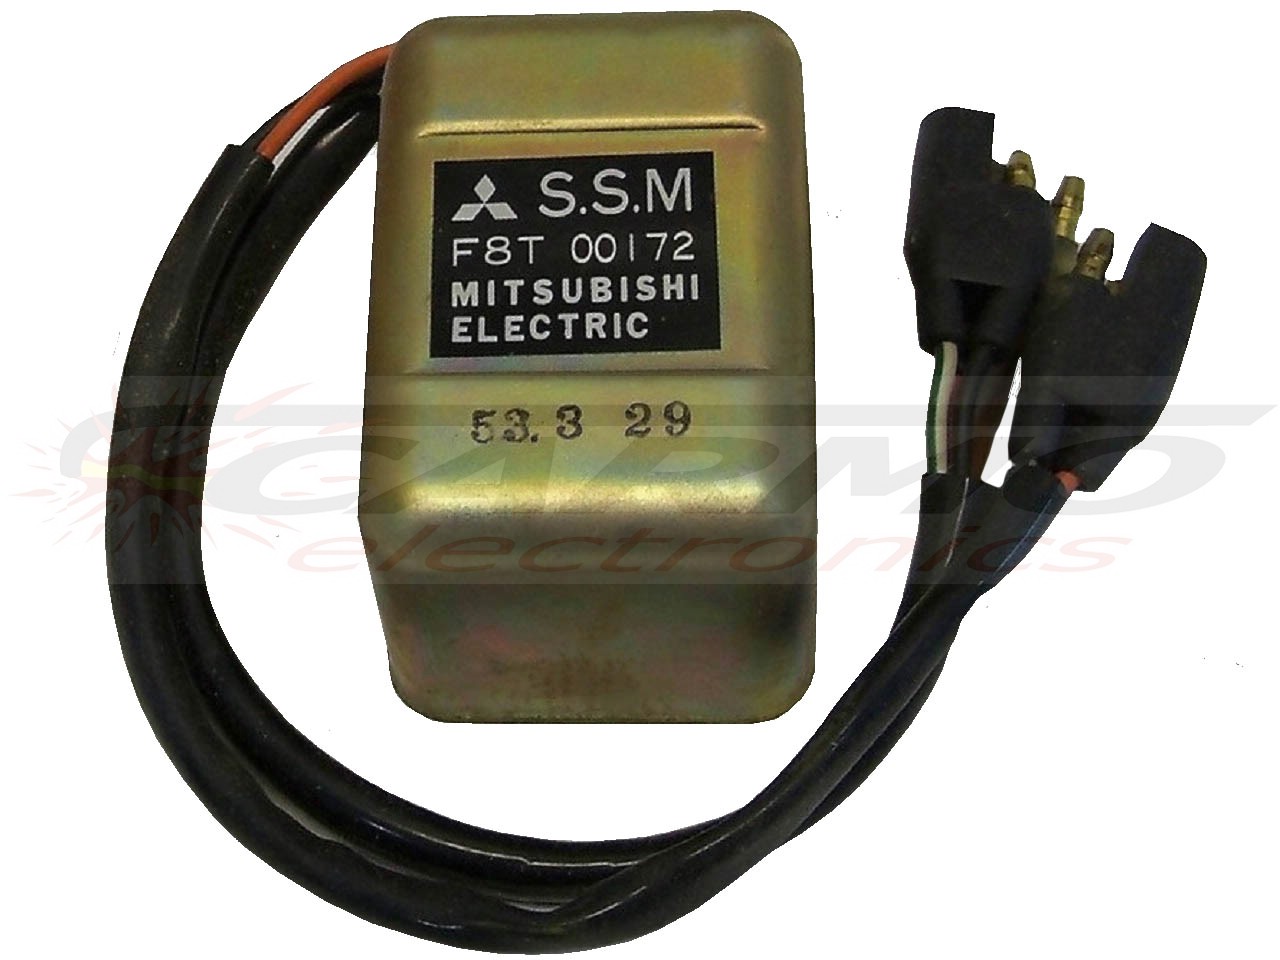 DT250 DT360 DT400 igniter ignition module CDI TCI Box (F8T00172)